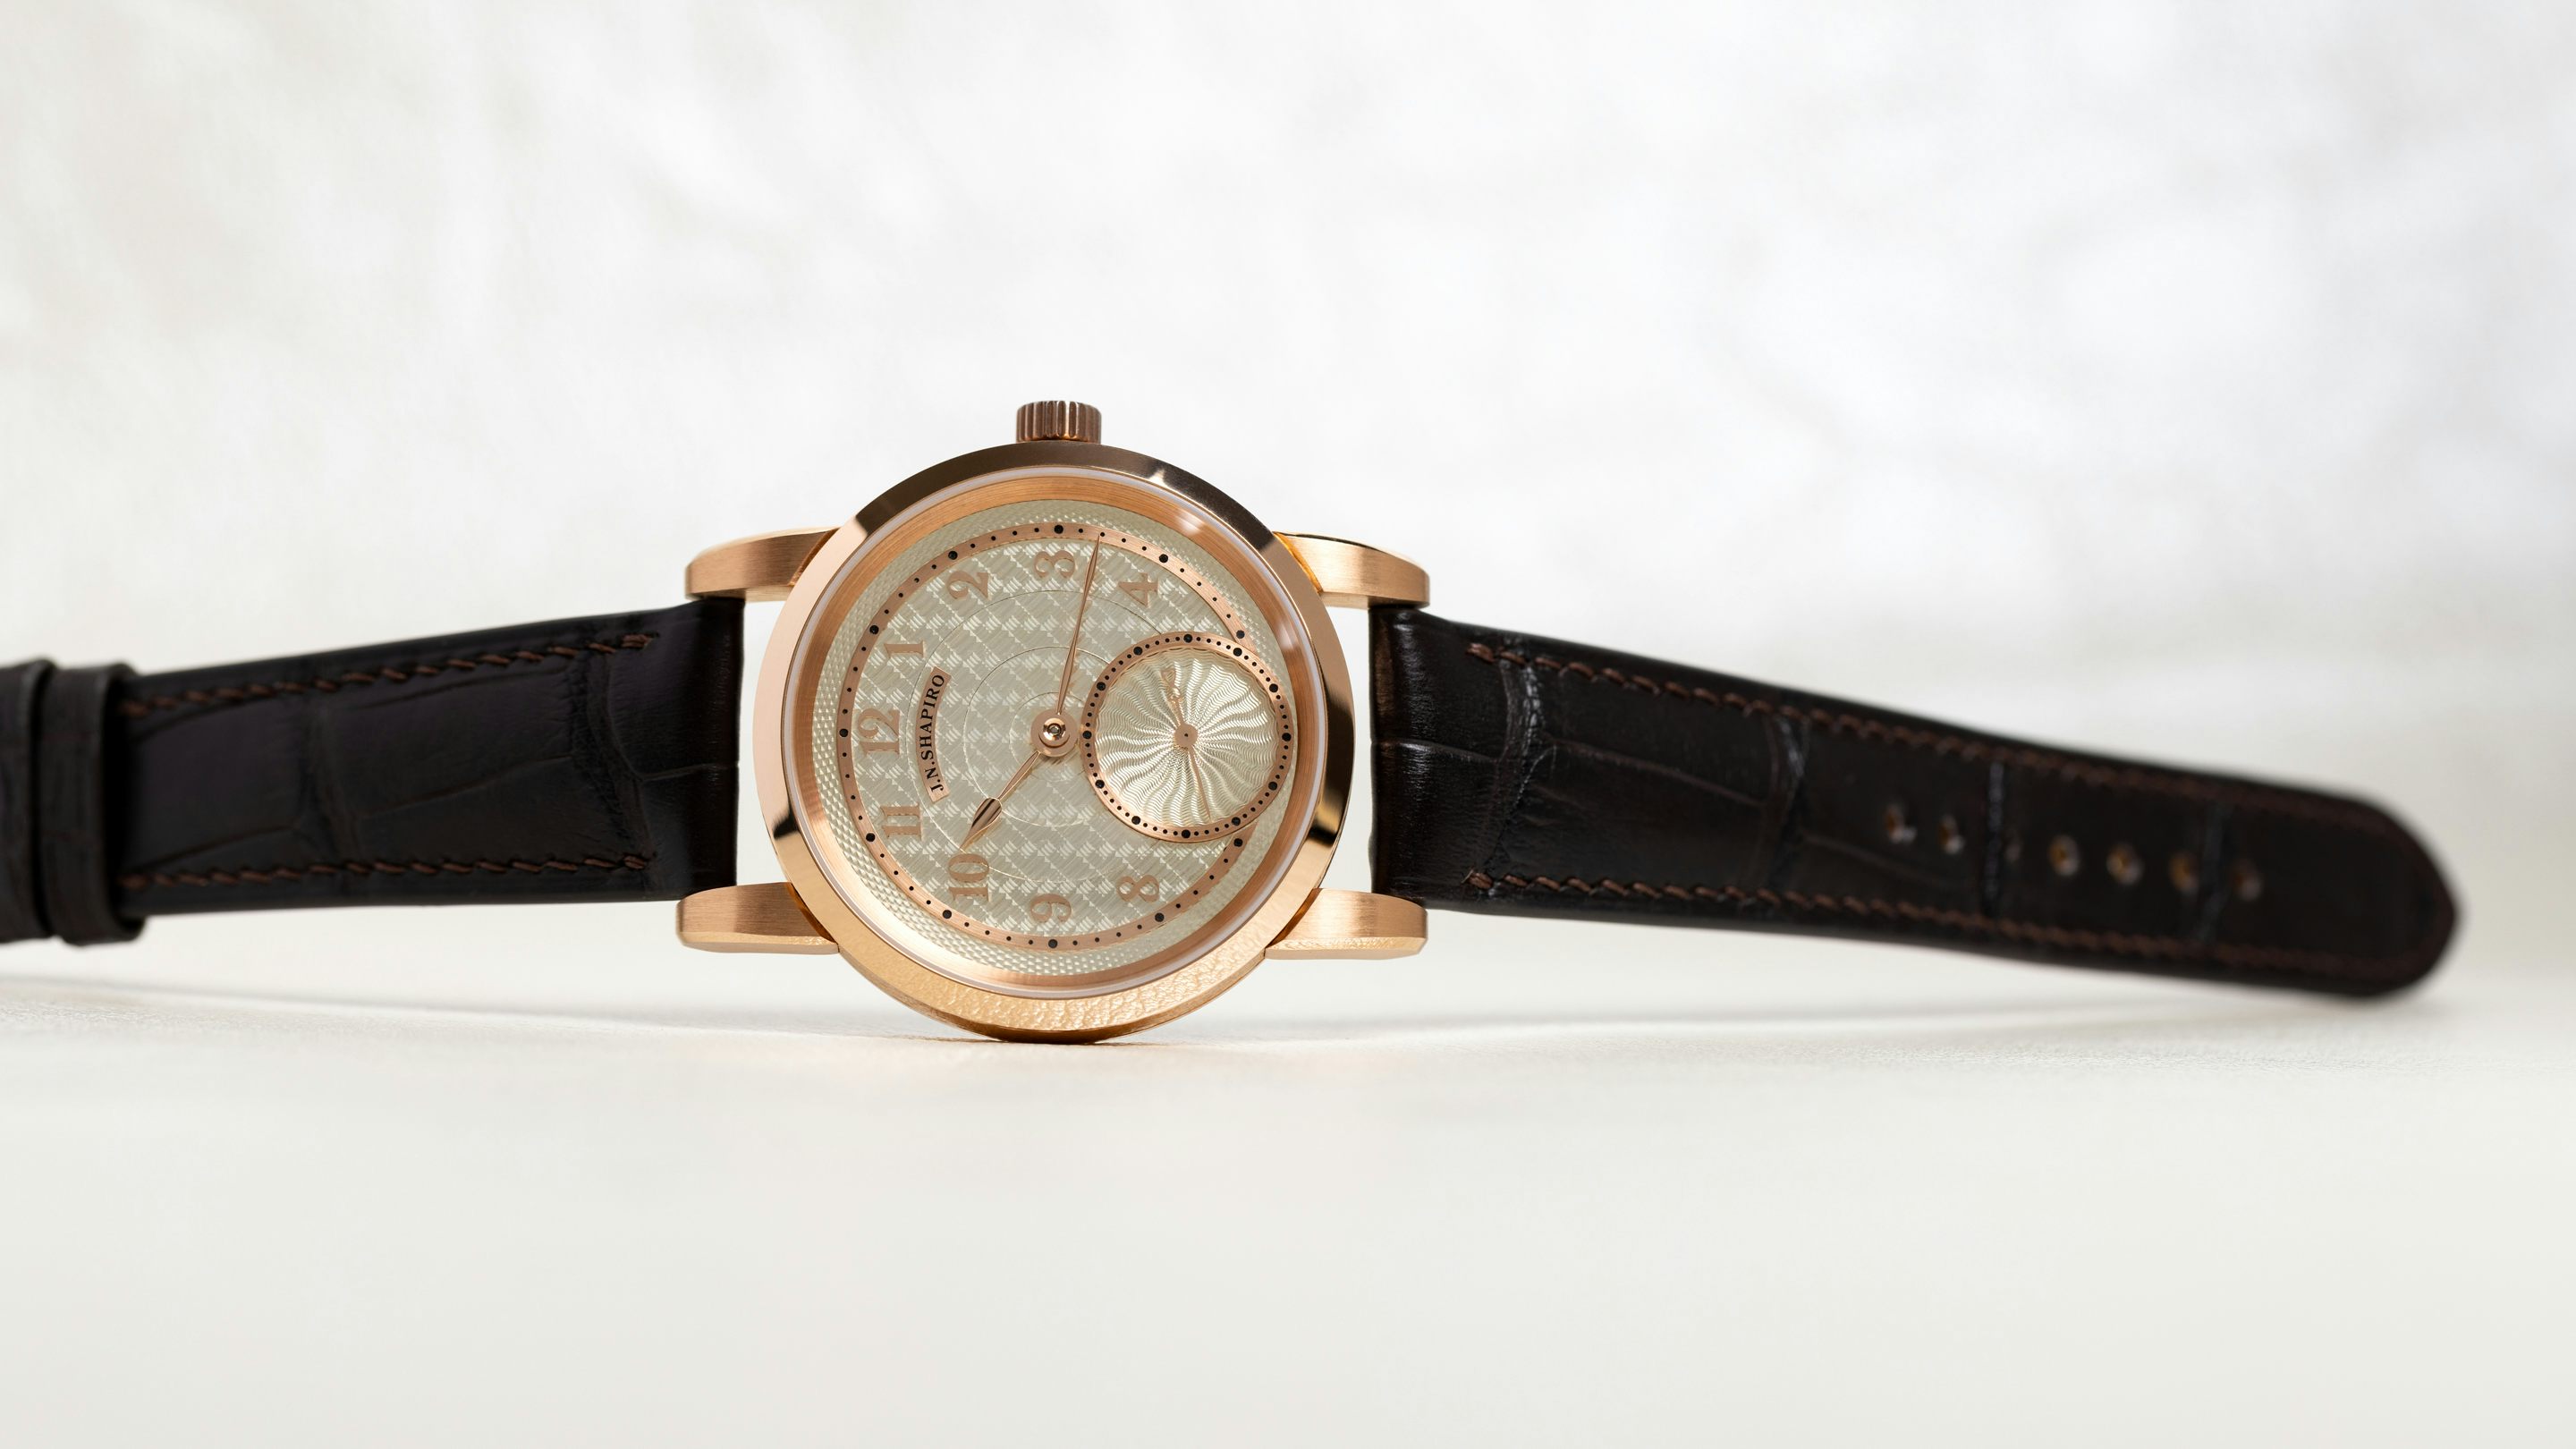 Introducing: Baume, A New Watch Brand Focused On Customization And